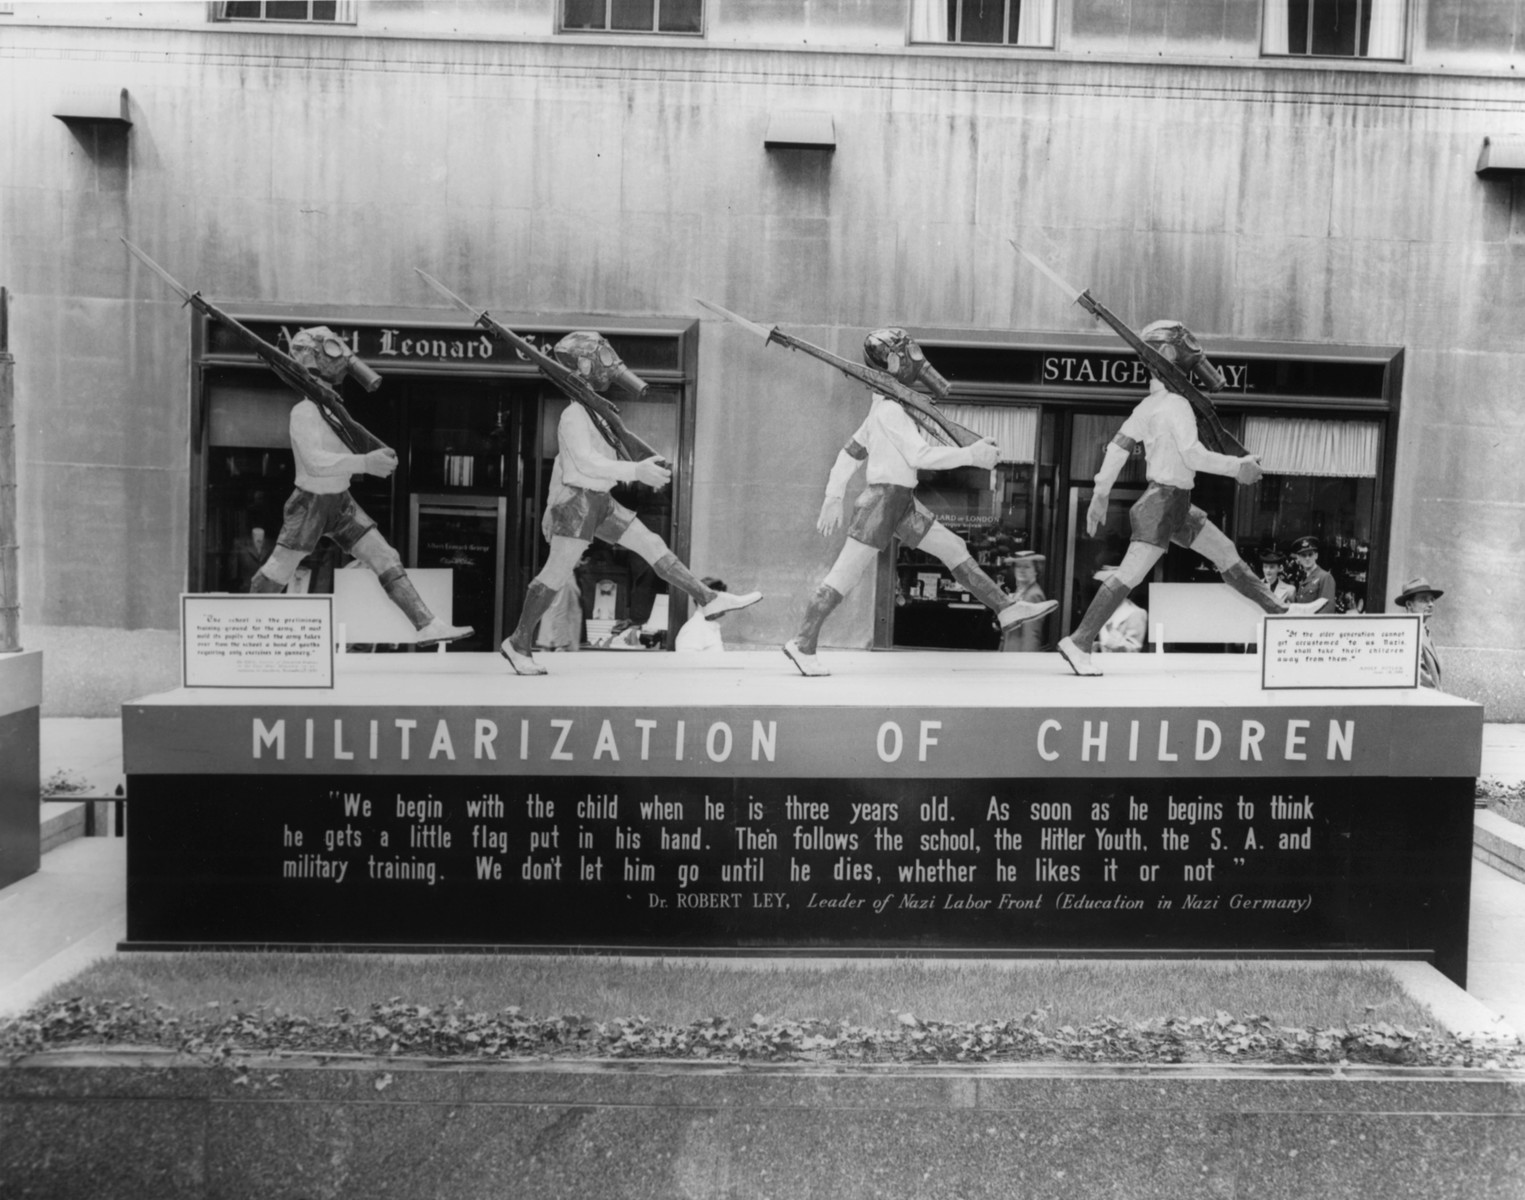 View of the tableau entitled "Militarization of Children" part of the  "The Nature of the Enemy" exhibition at Rockefeller Plaza in New York city.  

The display depicts the enemy's conception of a child's education.